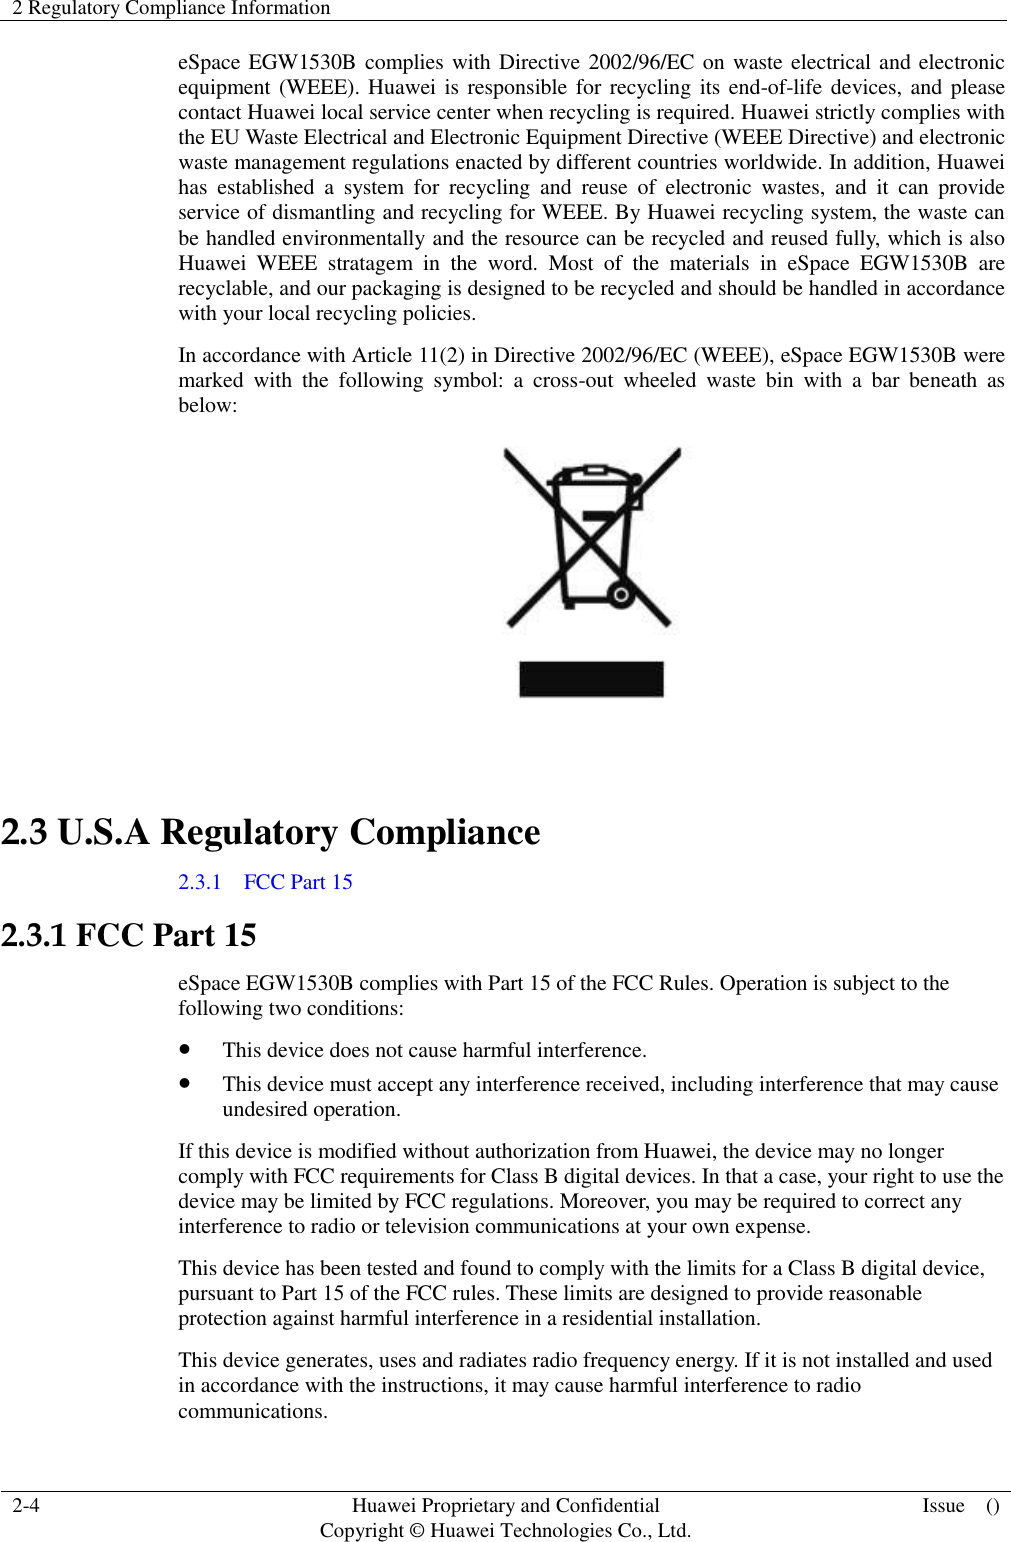 2 Regulatory Compliance Information    2-4 Huawei Proprietary and Confidential                                     Copyright © Huawei Technologies Co., Ltd. Issue    ()  eSpace EGW1530B complies with Directive 2002/96/EC on waste electrical and electronic equipment (WEEE). Huawei is responsible for recycling its end-of-life devices, and  please contact Huawei local service center when recycling is required. Huawei strictly complies with the EU Waste Electrical and Electronic Equipment Directive (WEEE Directive) and electronic waste management regulations enacted by different countries worldwide. In addition, Huawei has  established  a  system  for  recycling  and  reuse  of  electronic  wastes,  and  it  can  provide service of dismantling and recycling for WEEE. By Huawei recycling system, the waste can be handled environmentally and the resource can be recycled and reused fully, which is also Huawei  WEEE  stratagem  in  the  word.  Most  of  the  materials  in  eSpace  EGW1530B  are recyclable, and our packaging is designed to be recycled and should be handled in accordance with your local recycling policies.   In accordance with Article 11(2) in Directive 2002/96/EC (WEEE), eSpace EGW1530B were marked  with  the  following  symbol:  a  cross-out  wheeled  waste  bin  with  a  bar  beneath  as below:   2.3 U.S.A Regulatory Compliance 2.3.1    FCC Part 15 2.3.1 FCC Part 15 eSpace EGW1530B complies with Part 15 of the FCC Rules. Operation is subject to the following two conditions:  This device does not cause harmful interference.  This device must accept any interference received, including interference that may cause undesired operation. If this device is modified without authorization from Huawei, the device may no longer comply with FCC requirements for Class B digital devices. In that a case, your right to use the device may be limited by FCC regulations. Moreover, you may be required to correct any interference to radio or television communications at your own expense. This device has been tested and found to comply with the limits for a Class B digital device, pursuant to Part 15 of the FCC rules. These limits are designed to provide reasonable protection against harmful interference in a residential installation. This device generates, uses and radiates radio frequency energy. If it is not installed and used in accordance with the instructions, it may cause harmful interference to radio communications. 